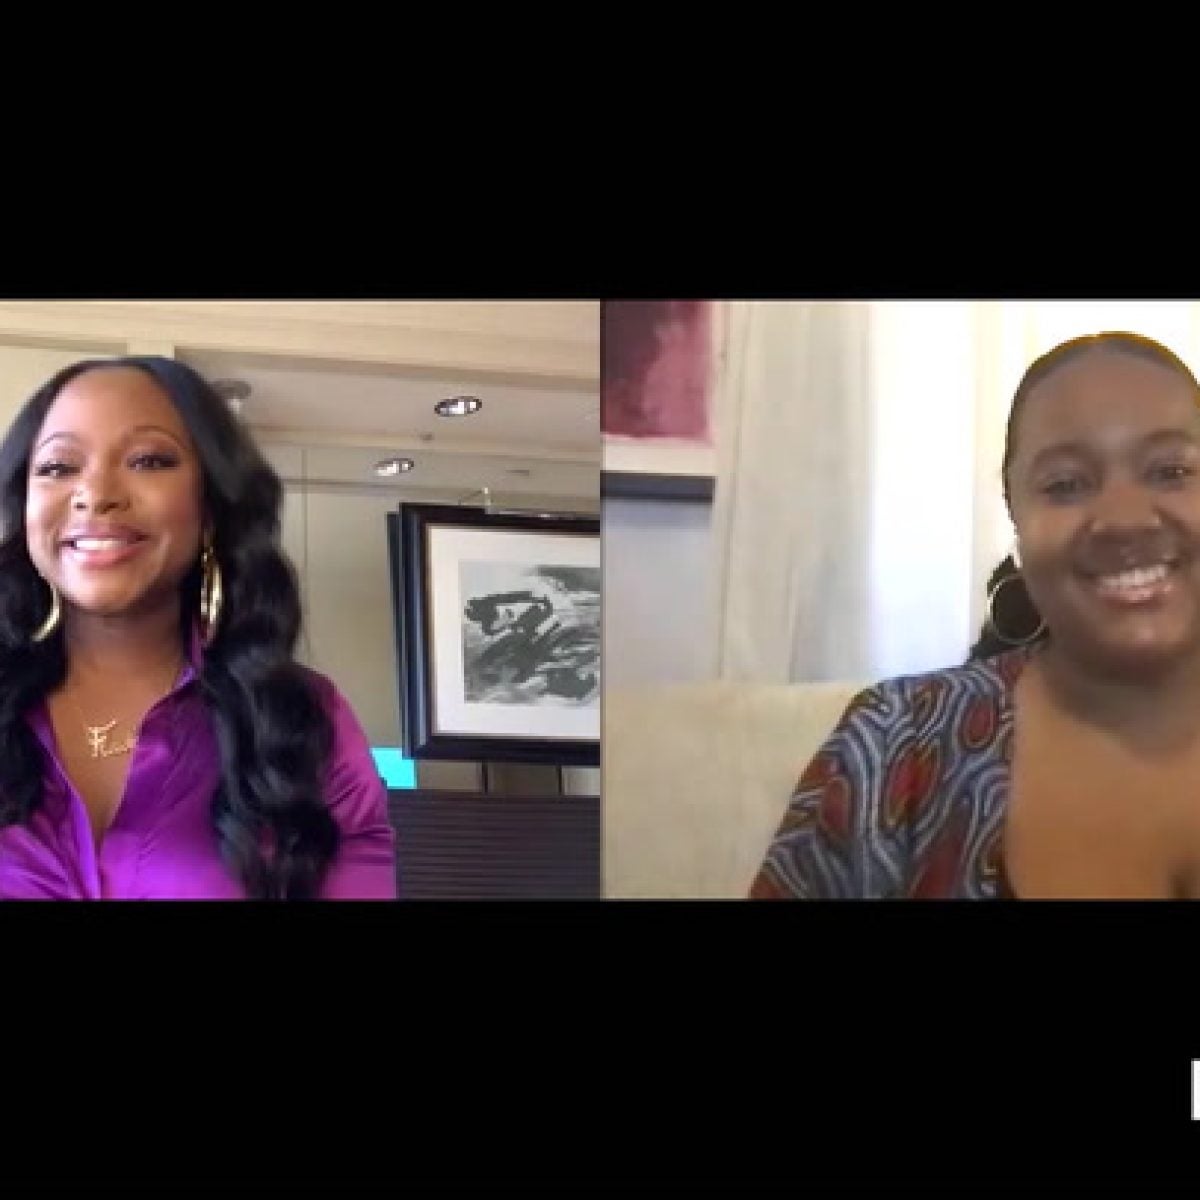 Naturi Naughton Talks Living Your Truth And Working With Legends On ABC’s ‘Queens’